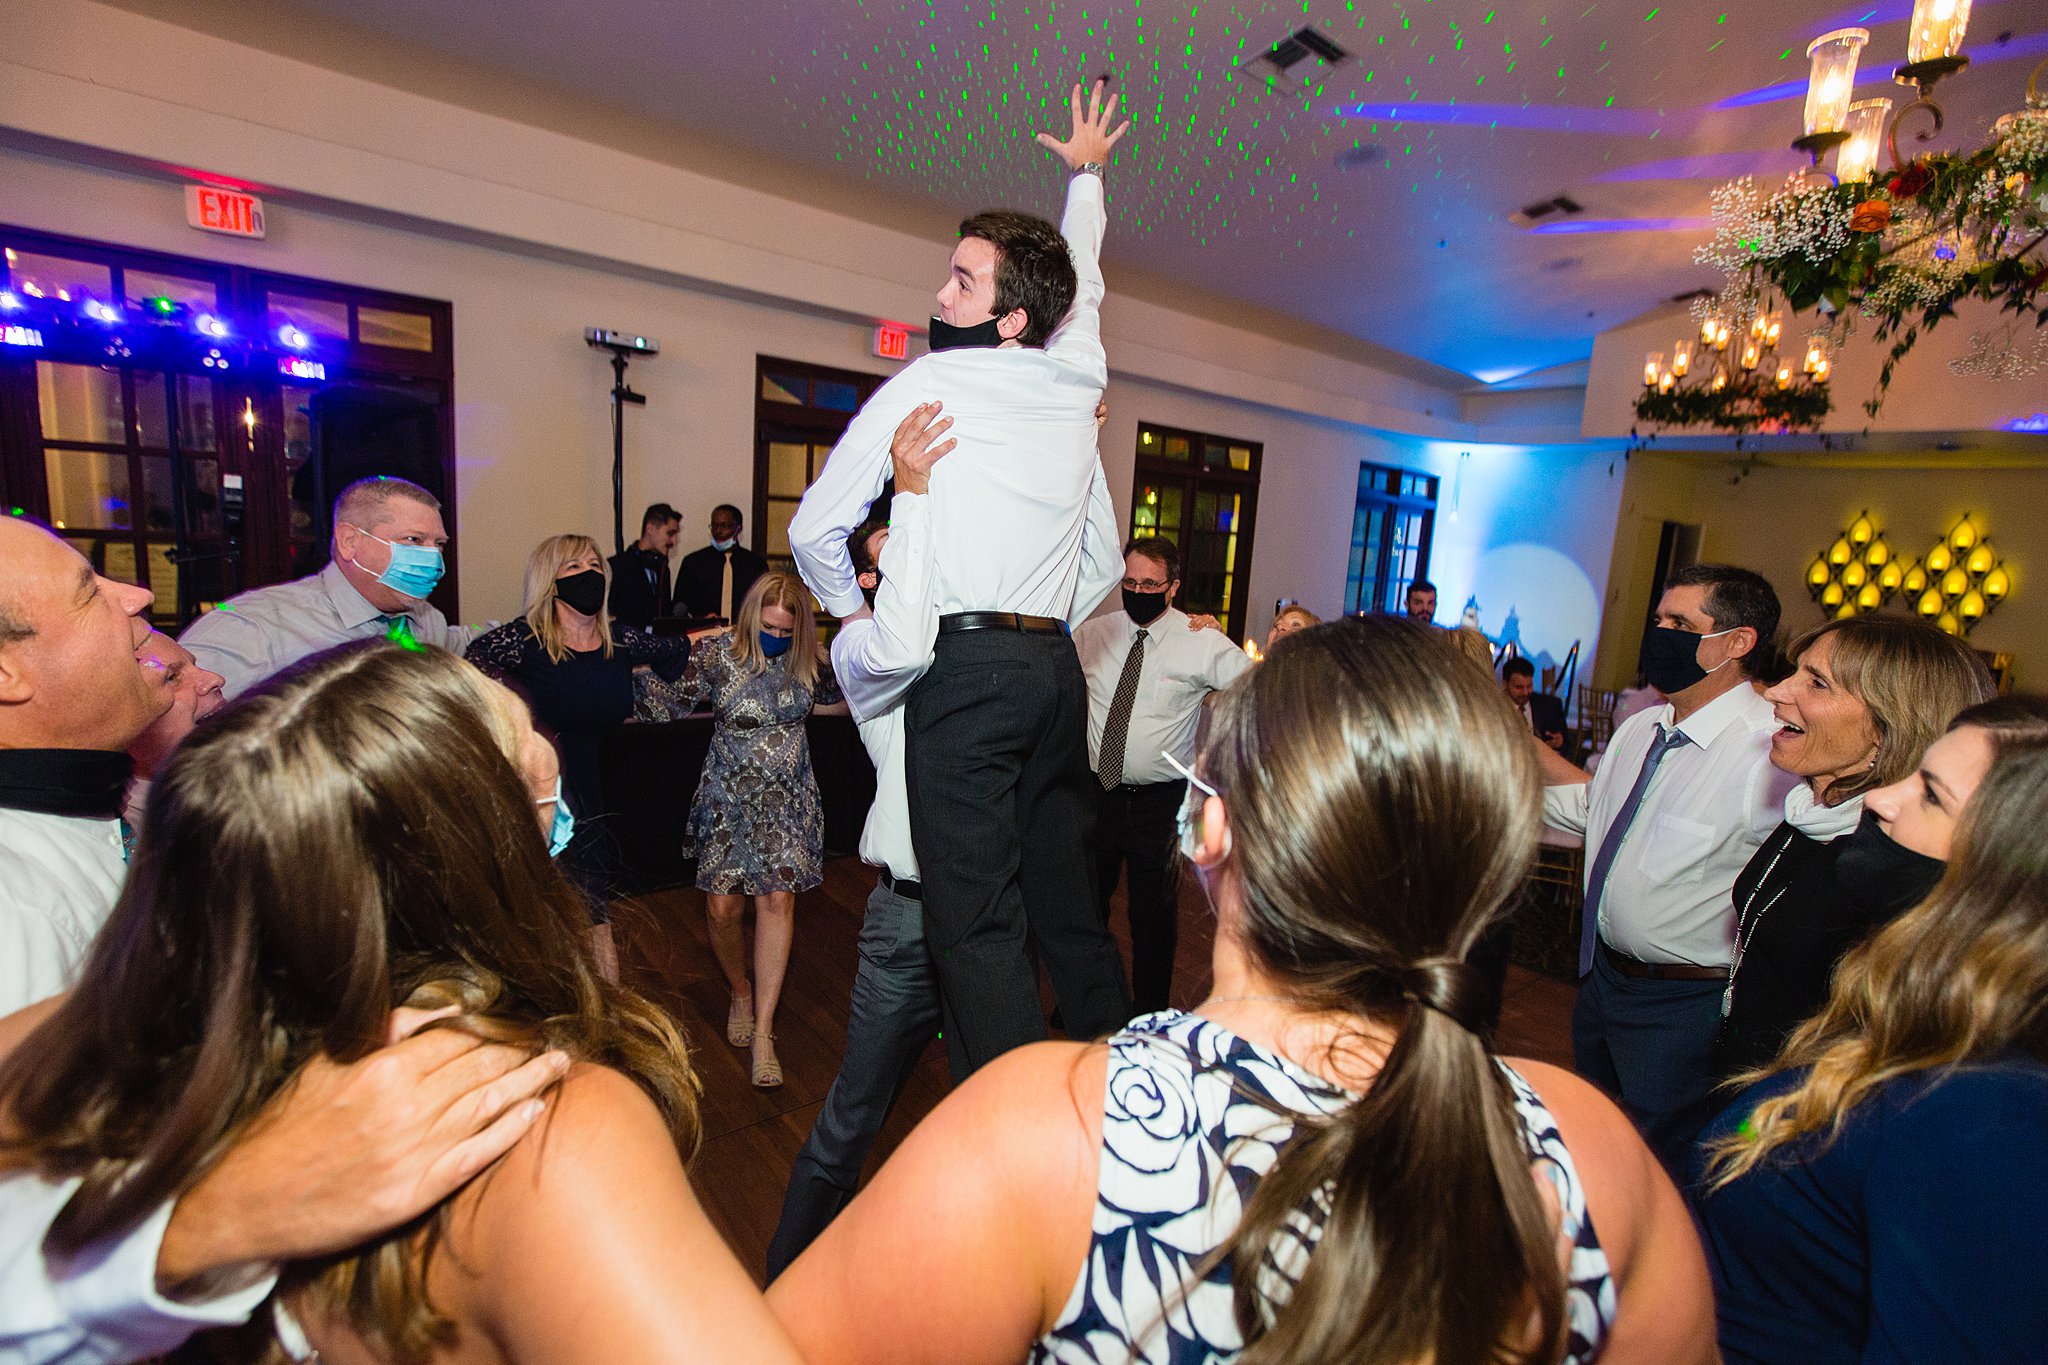 Groom dancing with guests at Secret Garden Events wedding reception by Phoenix wedding photographer PMA Photography